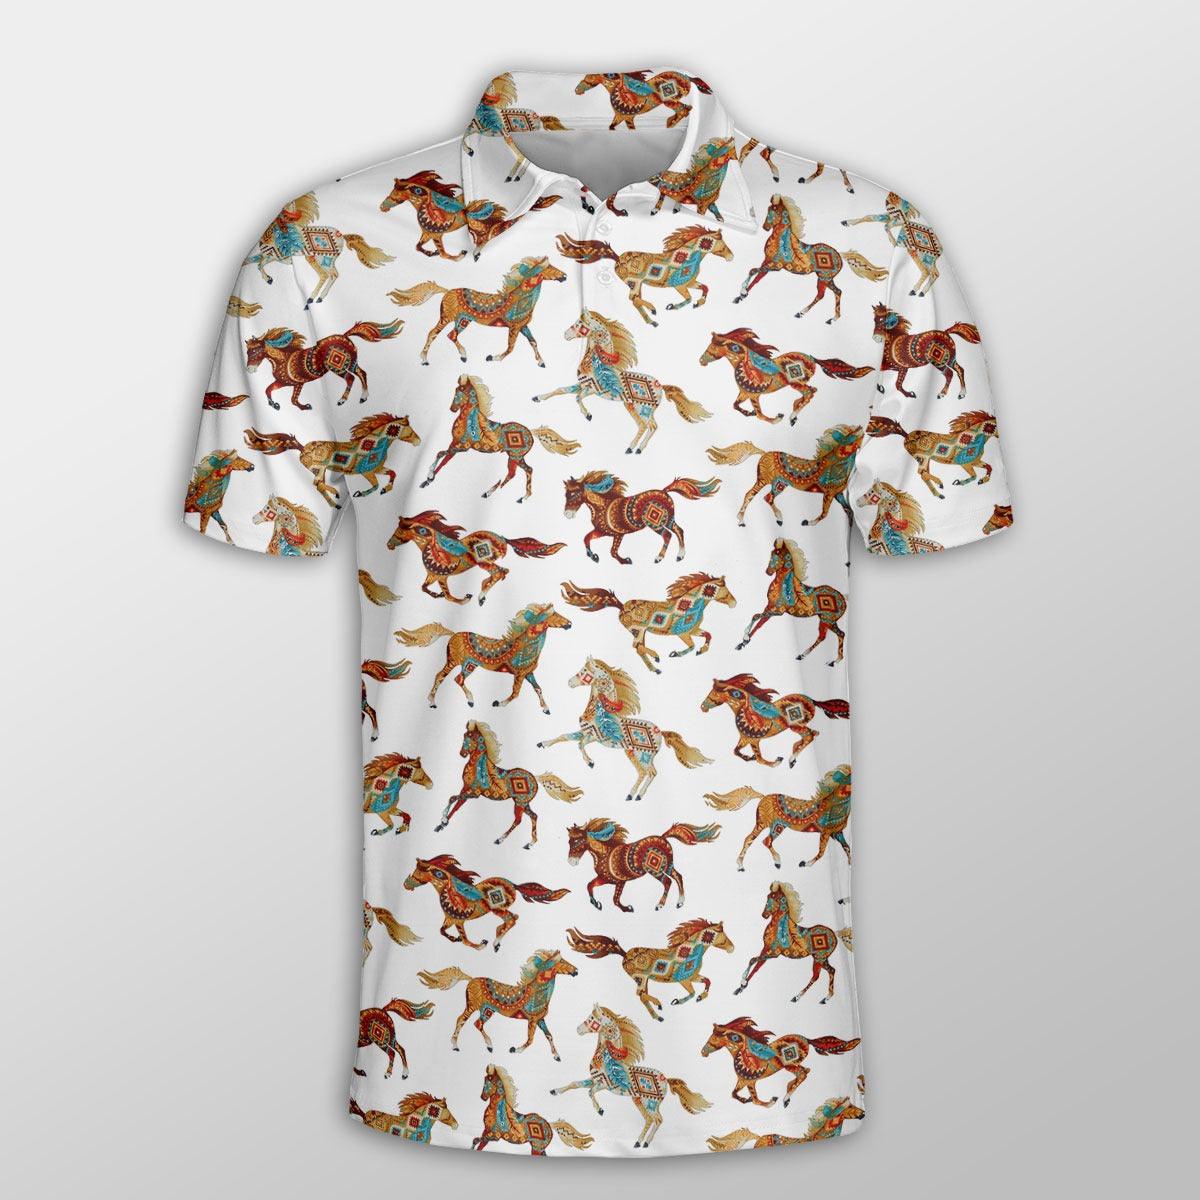 Horse Men Polo Shirts For Summer - Native Horse Pattern Button Shirts For Men - Perfect Gift For Horse Lovers, Native Lovers - Amzanimalsgift